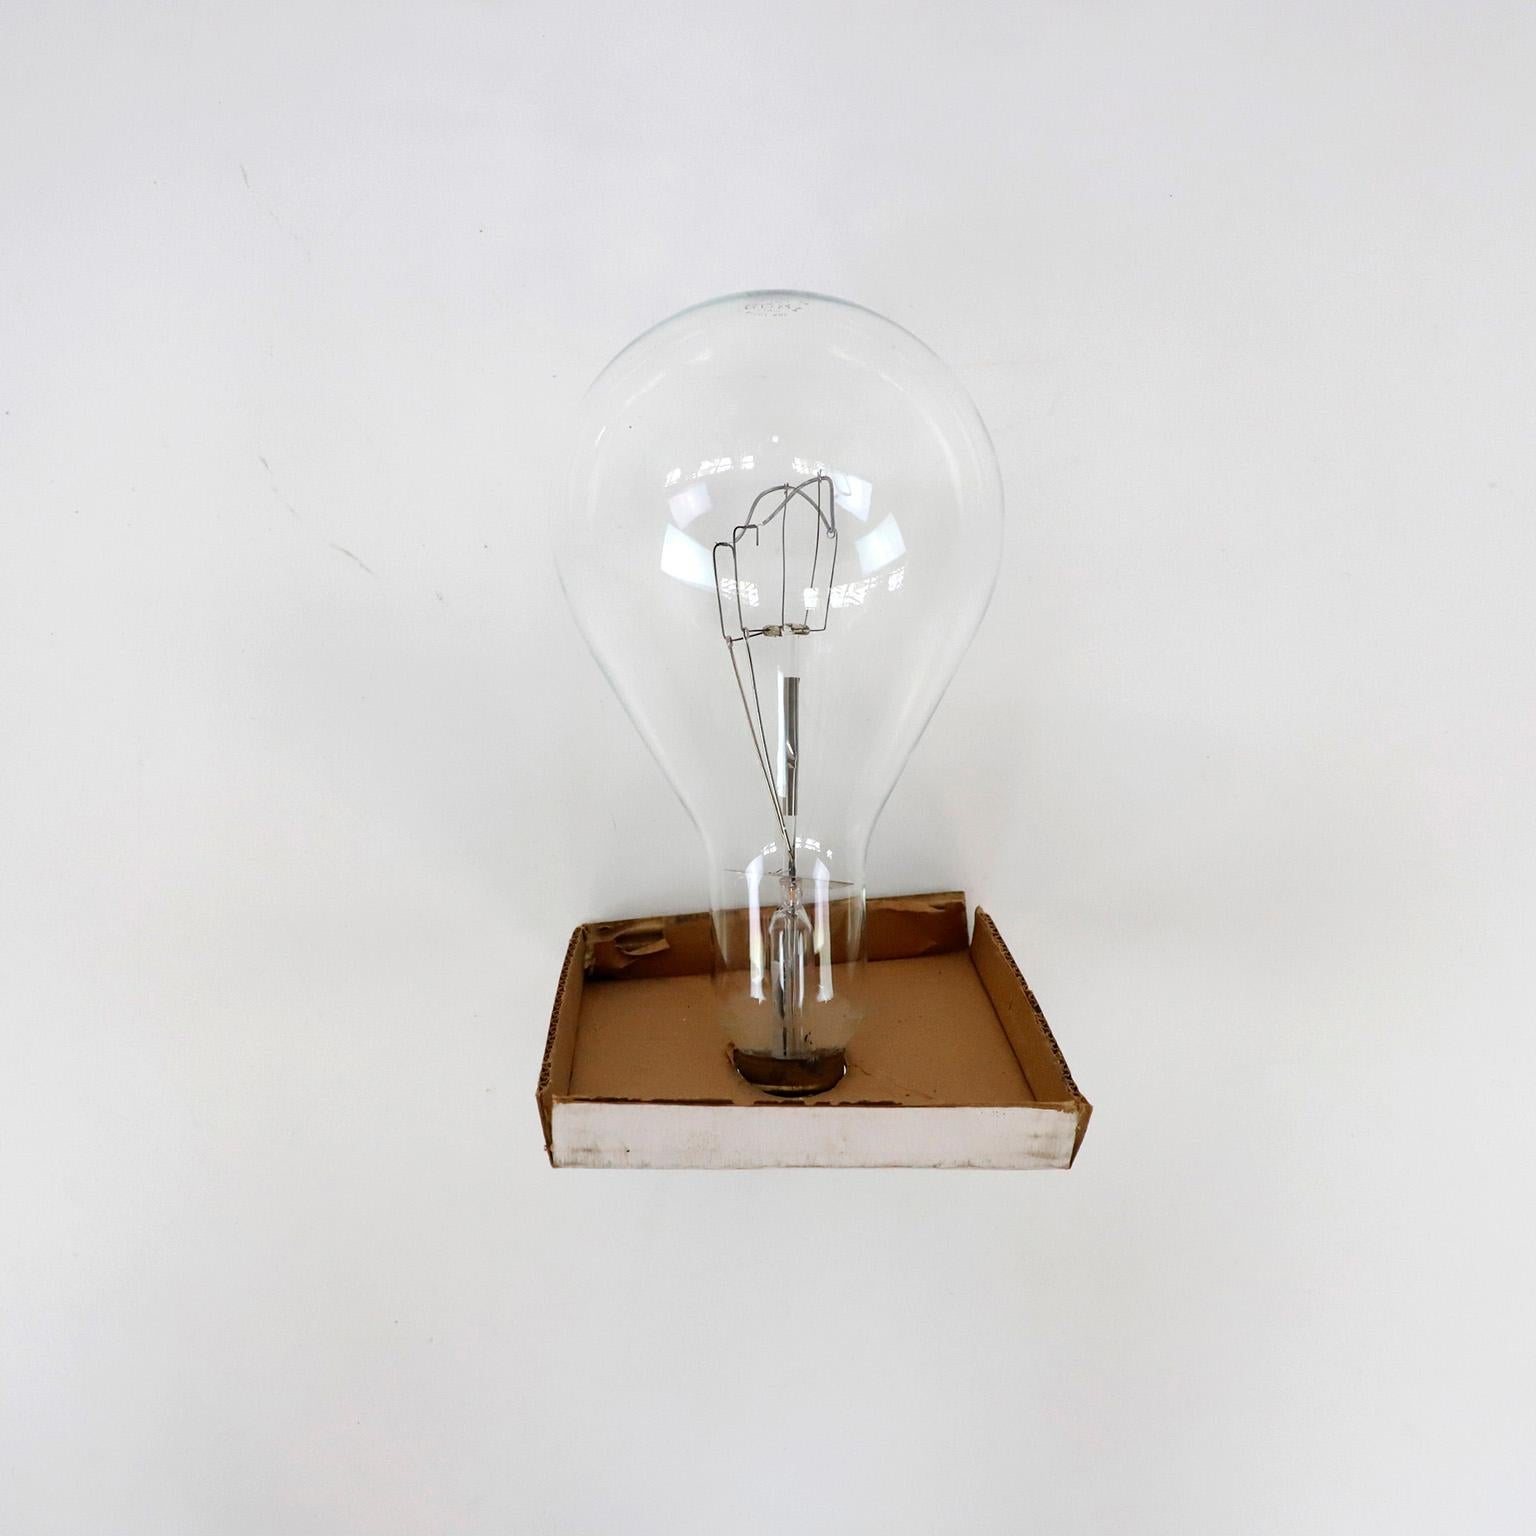 Circa 1950. We offer this big size Westinghouse bulb.